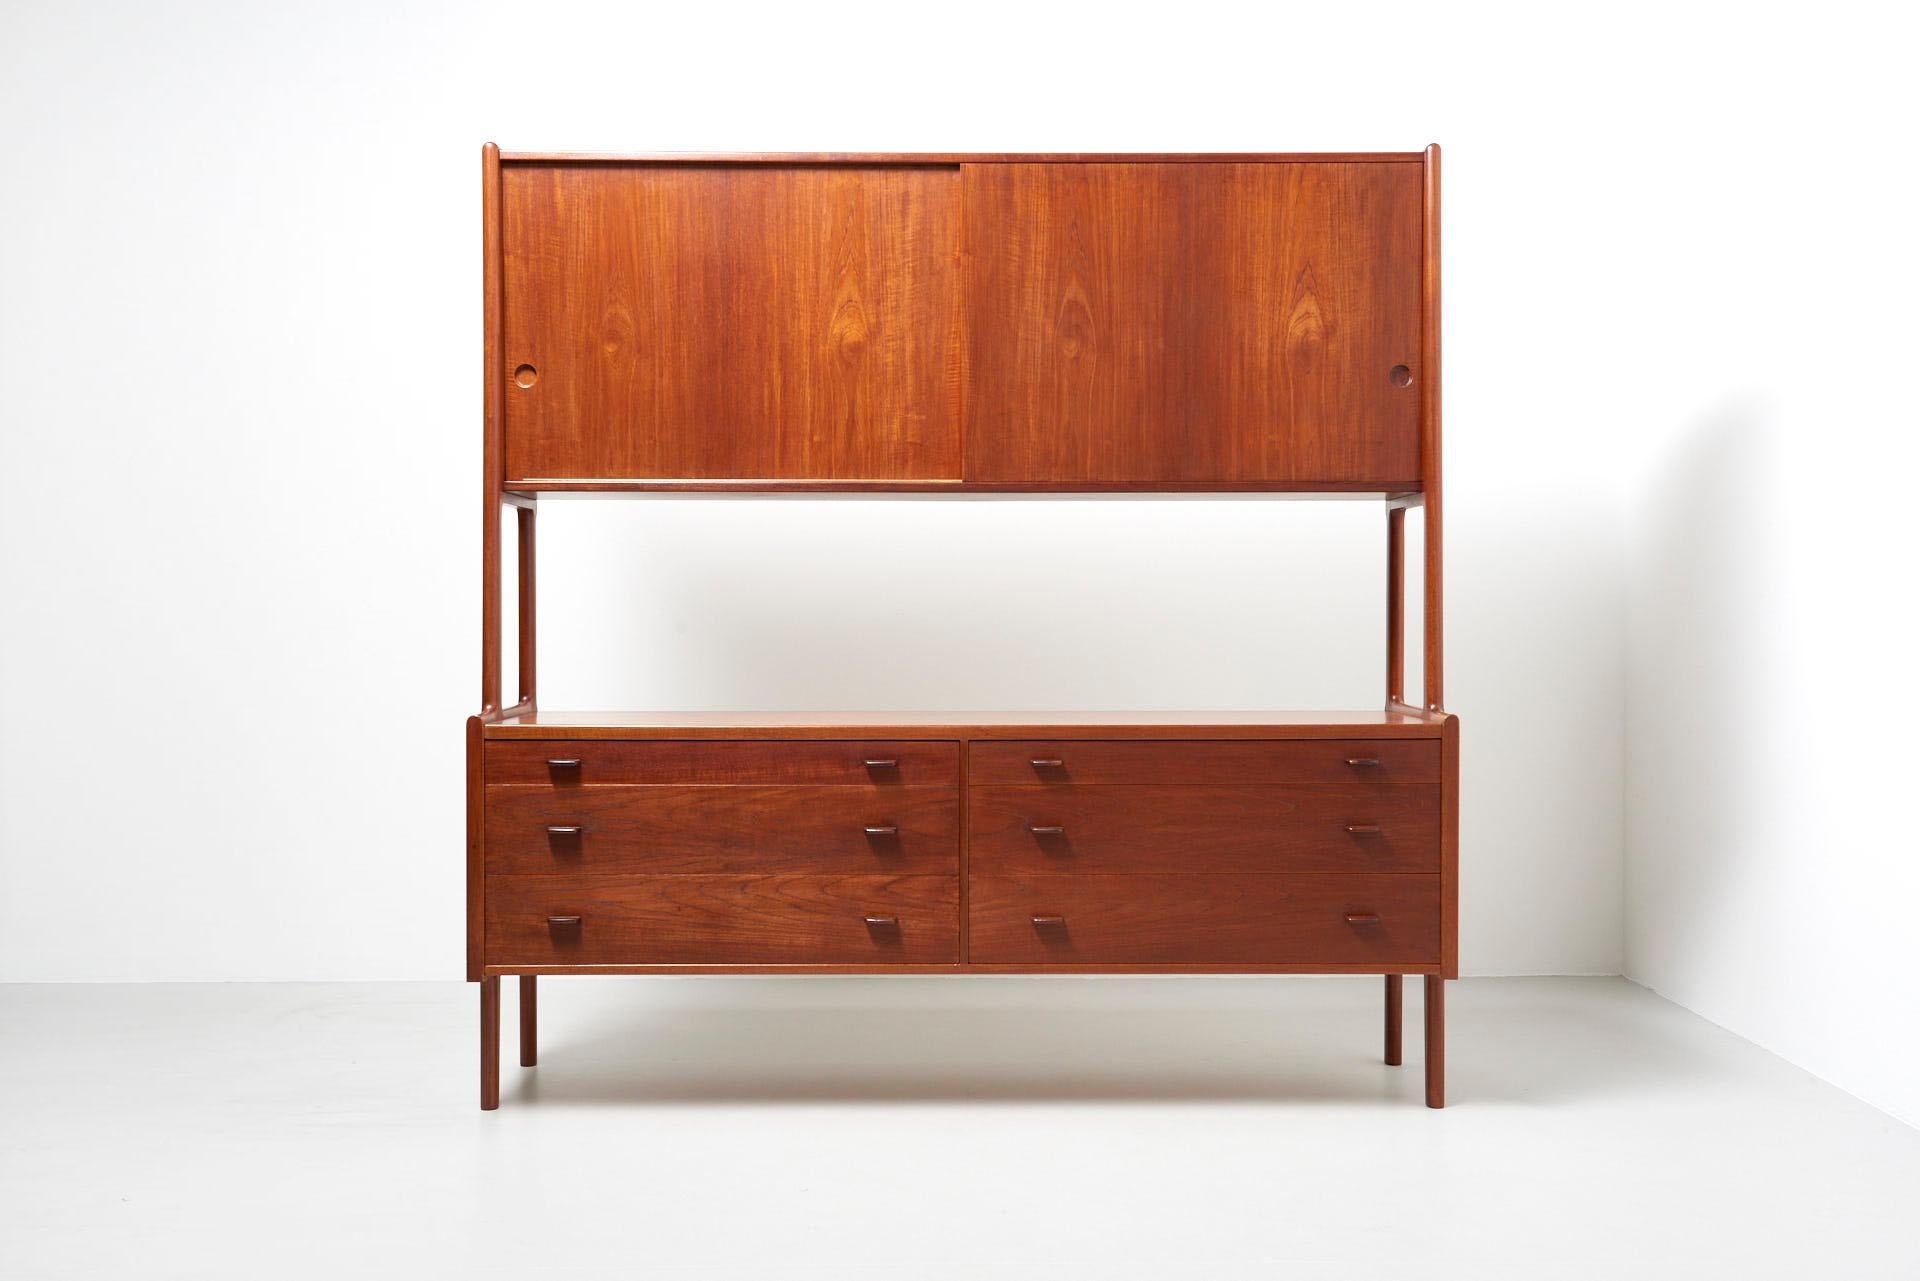 This teak sideboard is designed by Hans J. Wegner and made by Ry Mobler in 1959. The interior is veneered with oakwood.